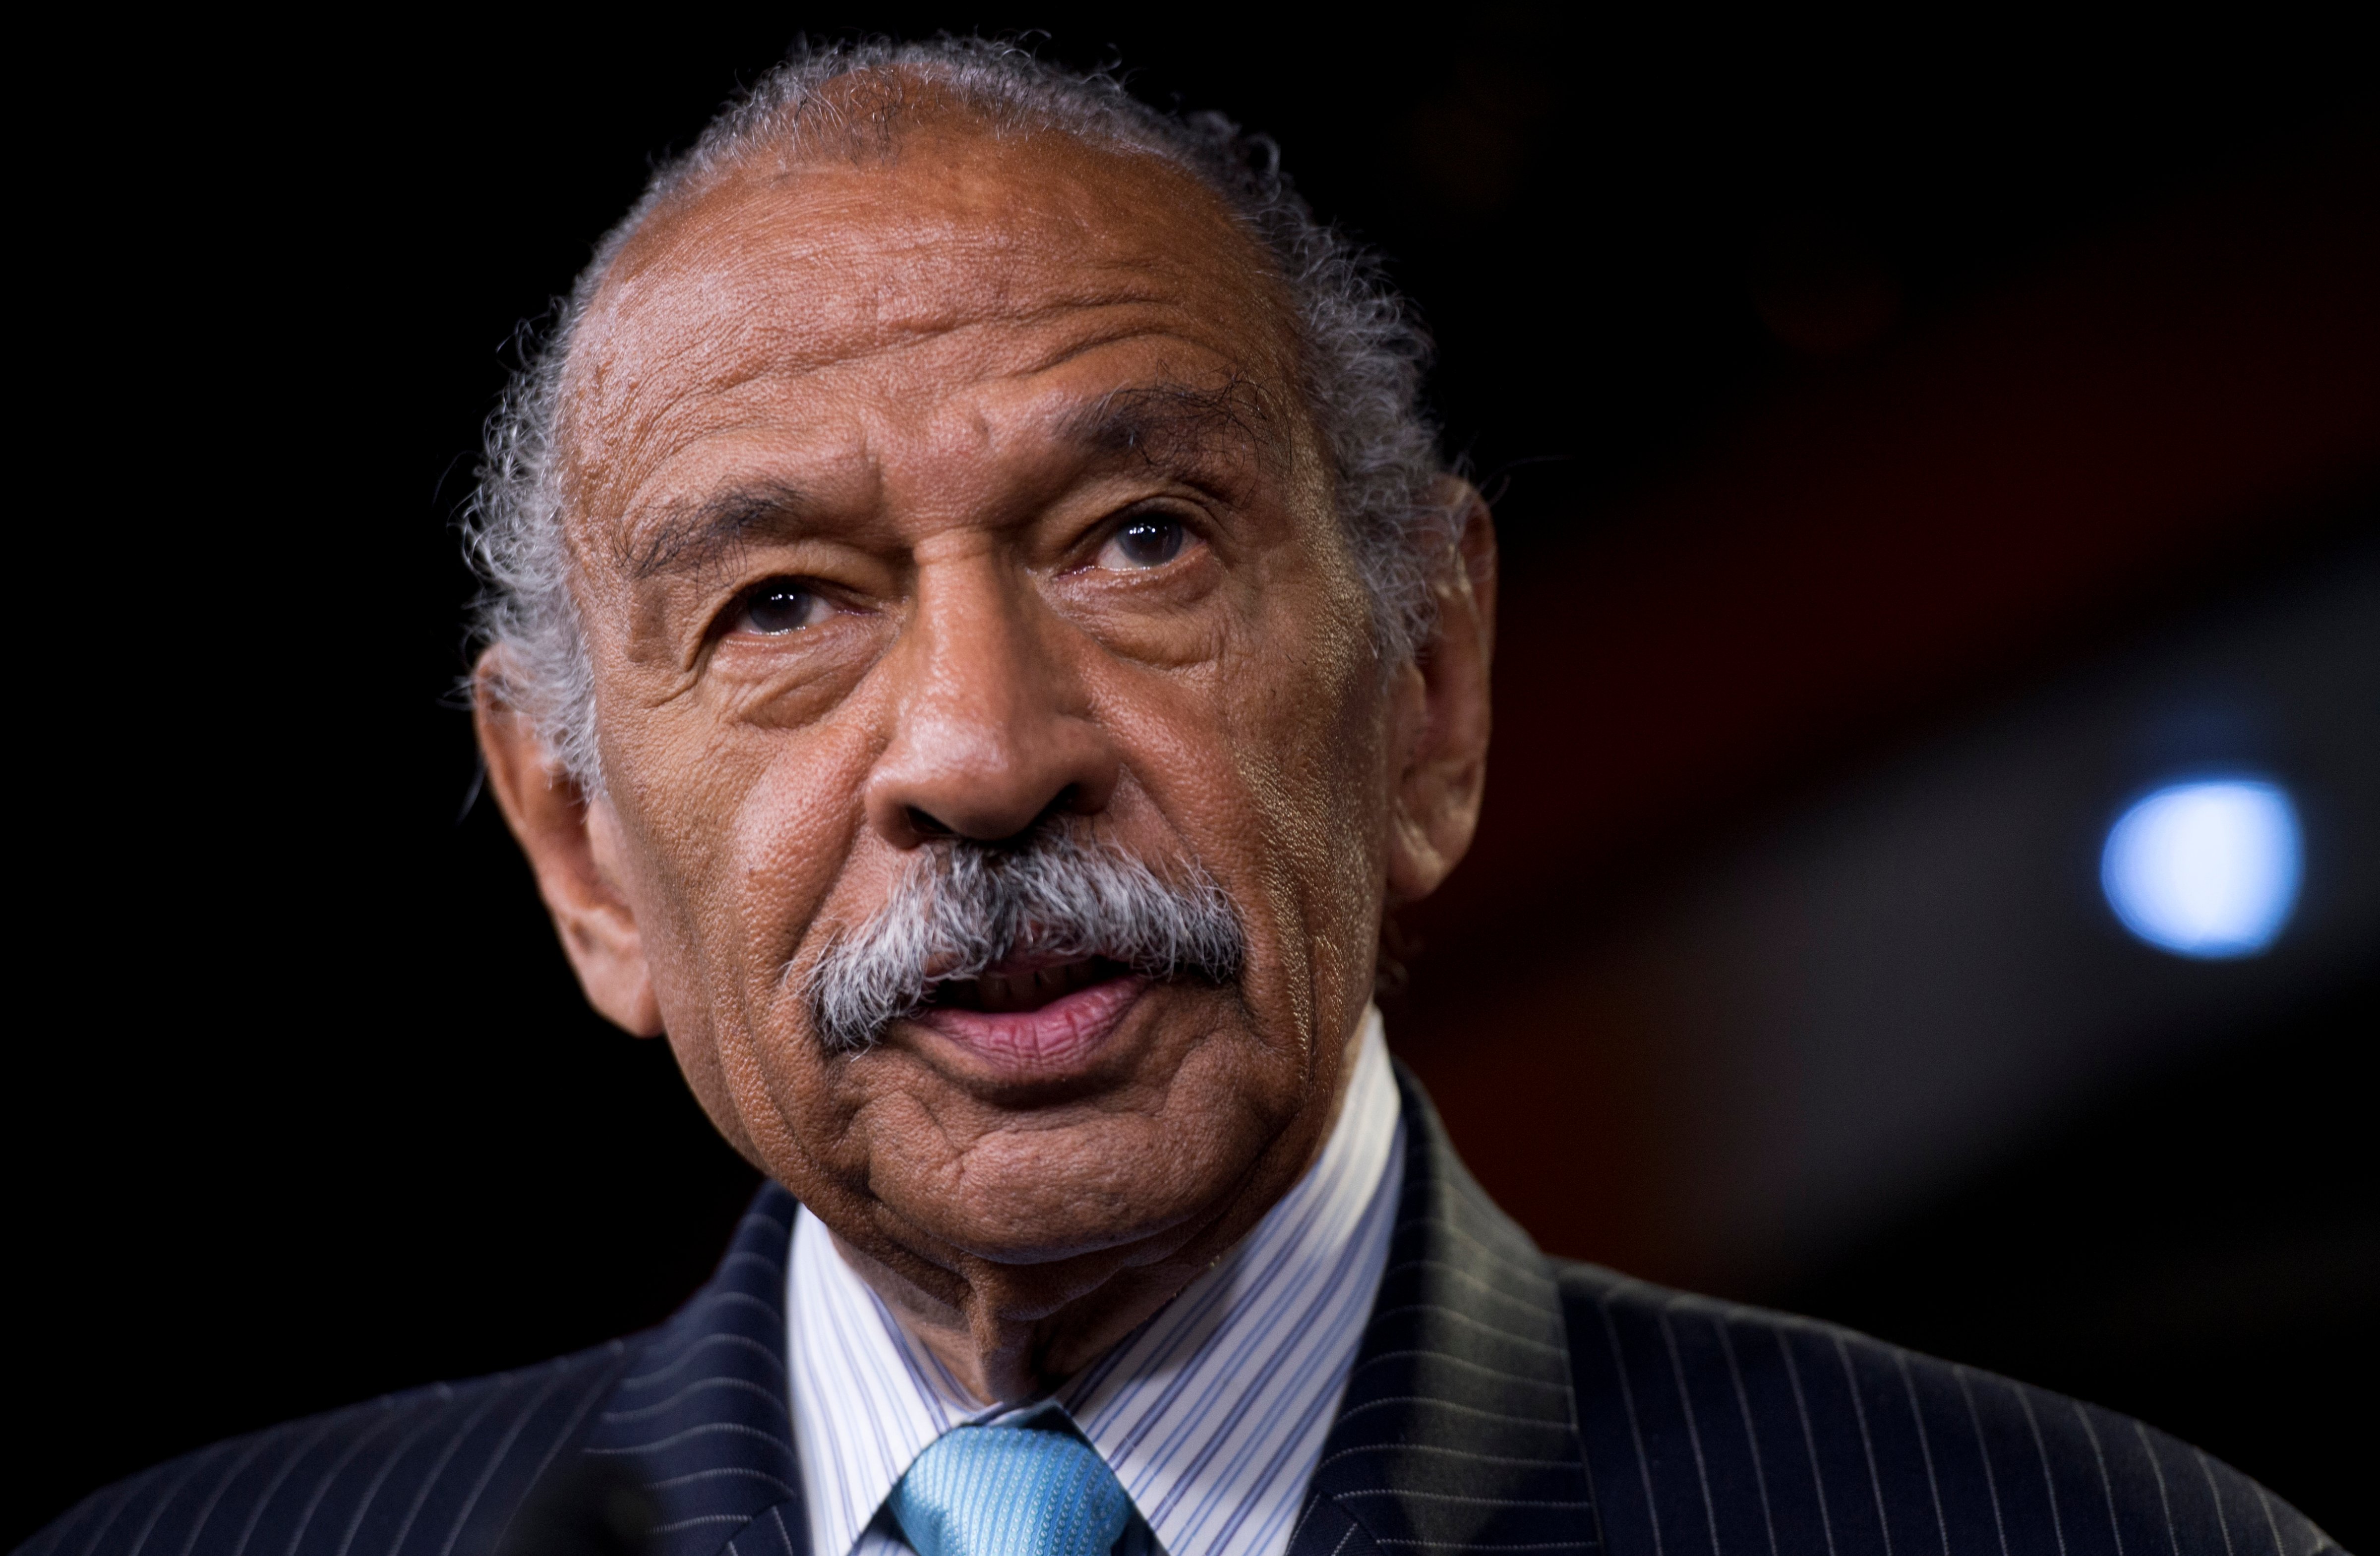 Rep. John Conyers, D-Mich., speaks during a Congressional Progressive Caucus news conference in the Capitol Visitor Center to introduce the Deal for All resolution. (Tom Williams—CQ-Roll Call,Inc./Getty Images)